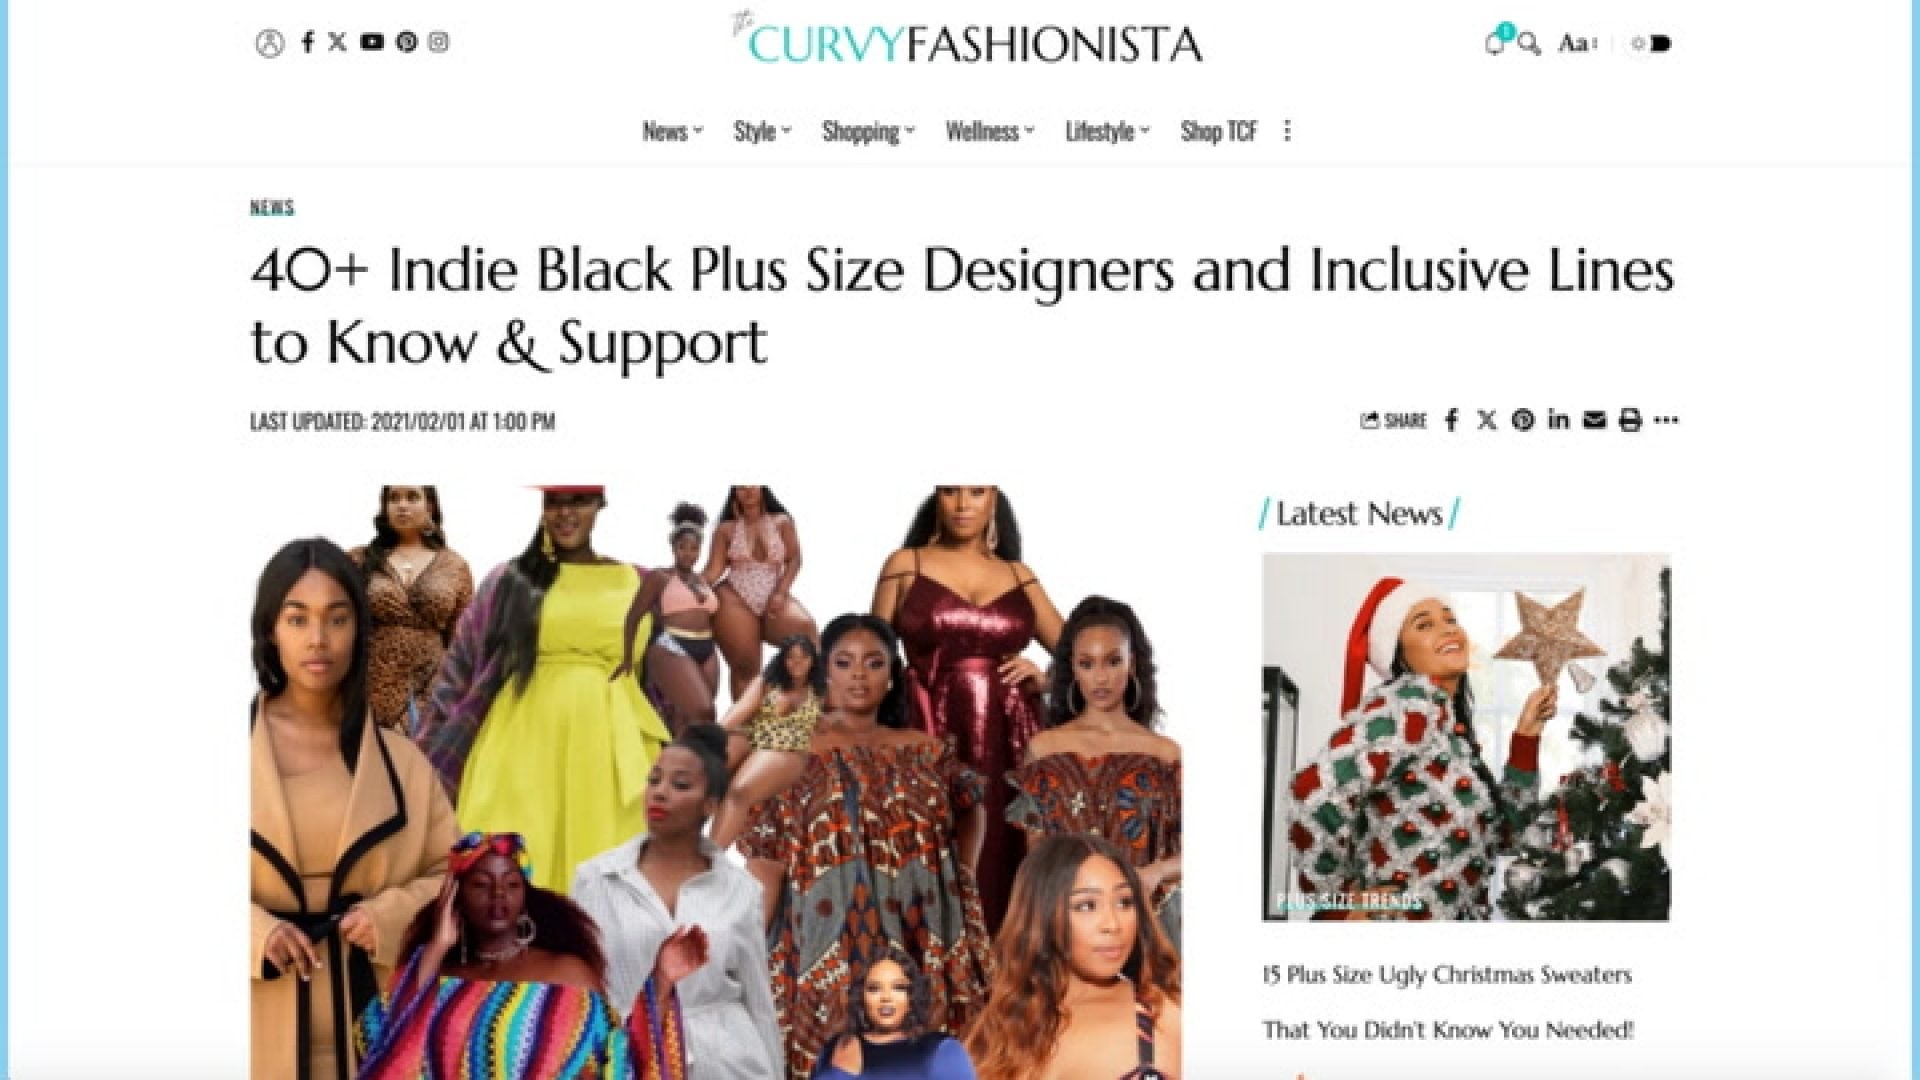 WATCH: Shop Essence Live – Let’s Talk Style With Curvy Fashionista